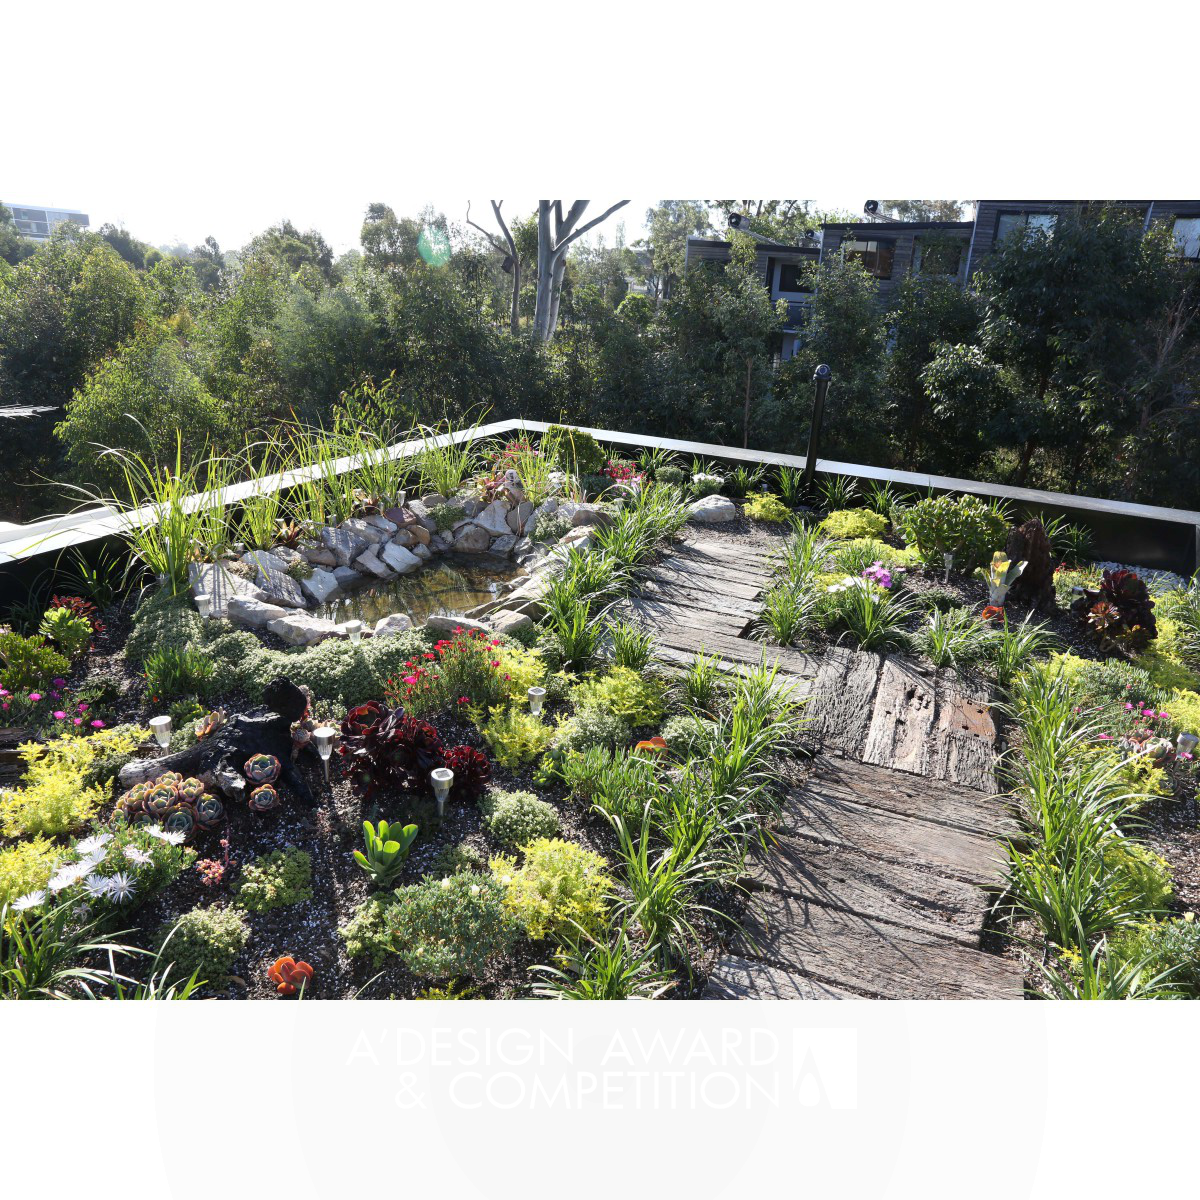 Forest Lodge ECO House Residential Garden Design by Chris Knierim